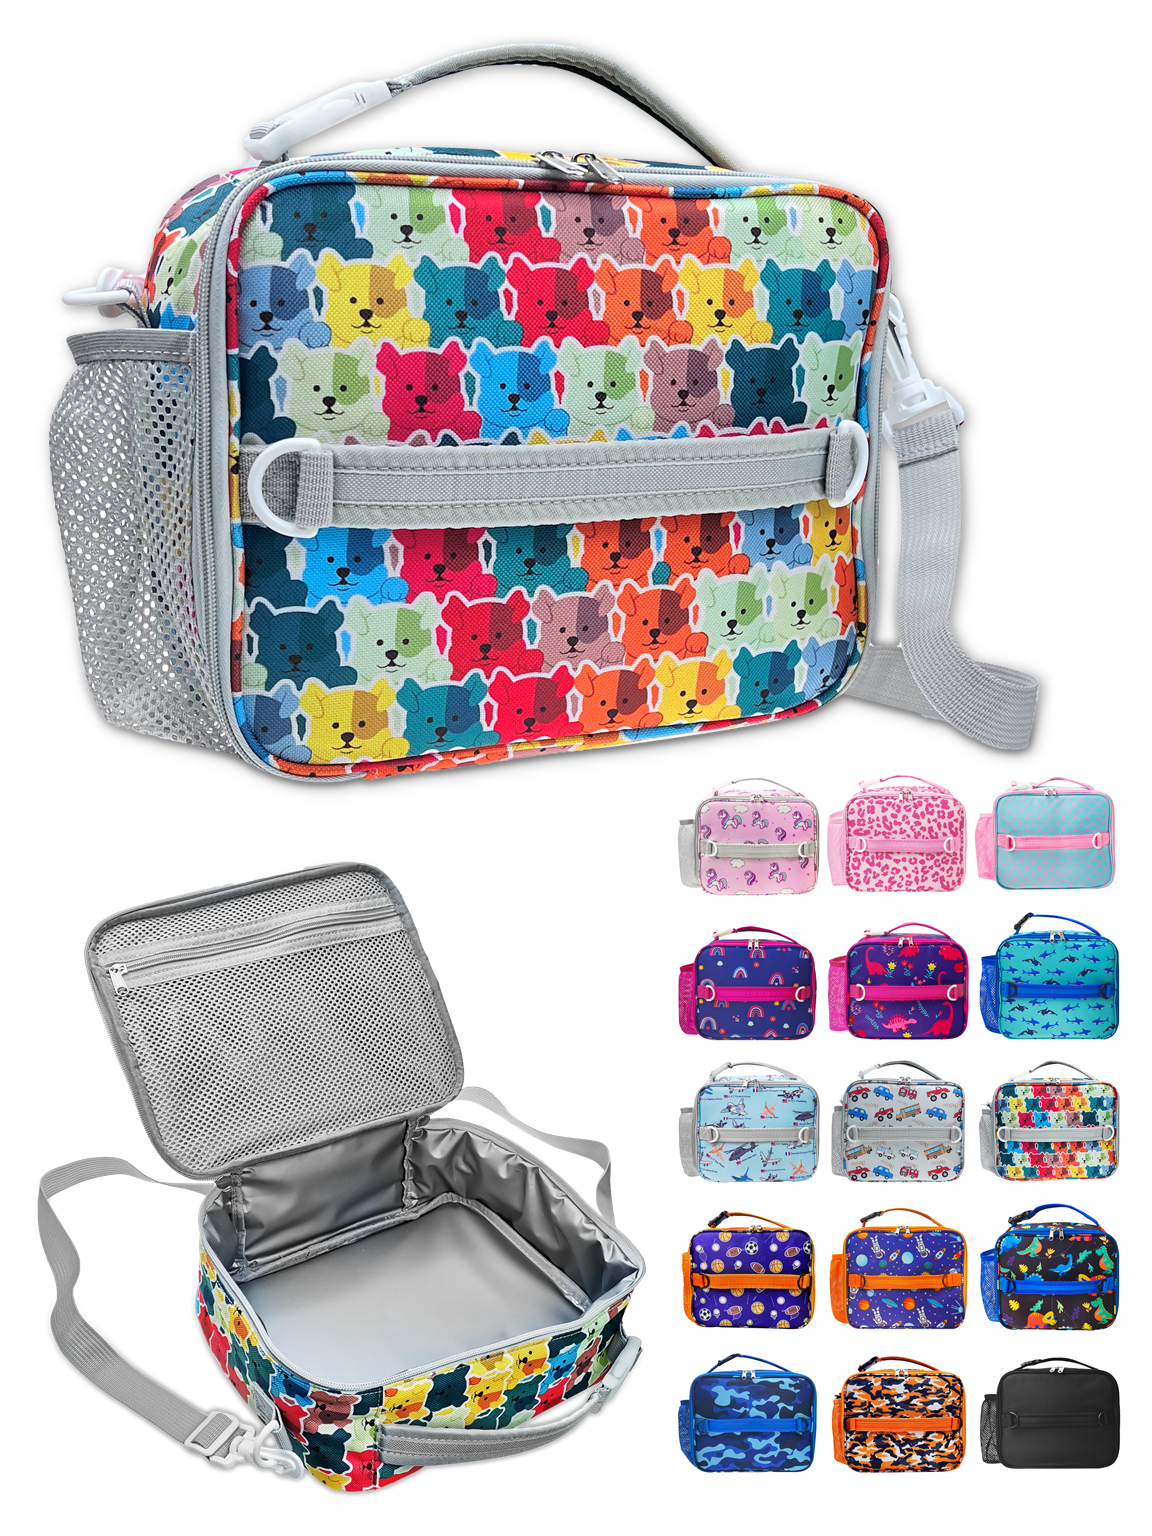  SAMERIO Kids Lunch Bag insulated Lunch Box Cooler Bento Bags  for School Work/Girls Boys Children Student with Adjustable Strap: Home &  Kitchen